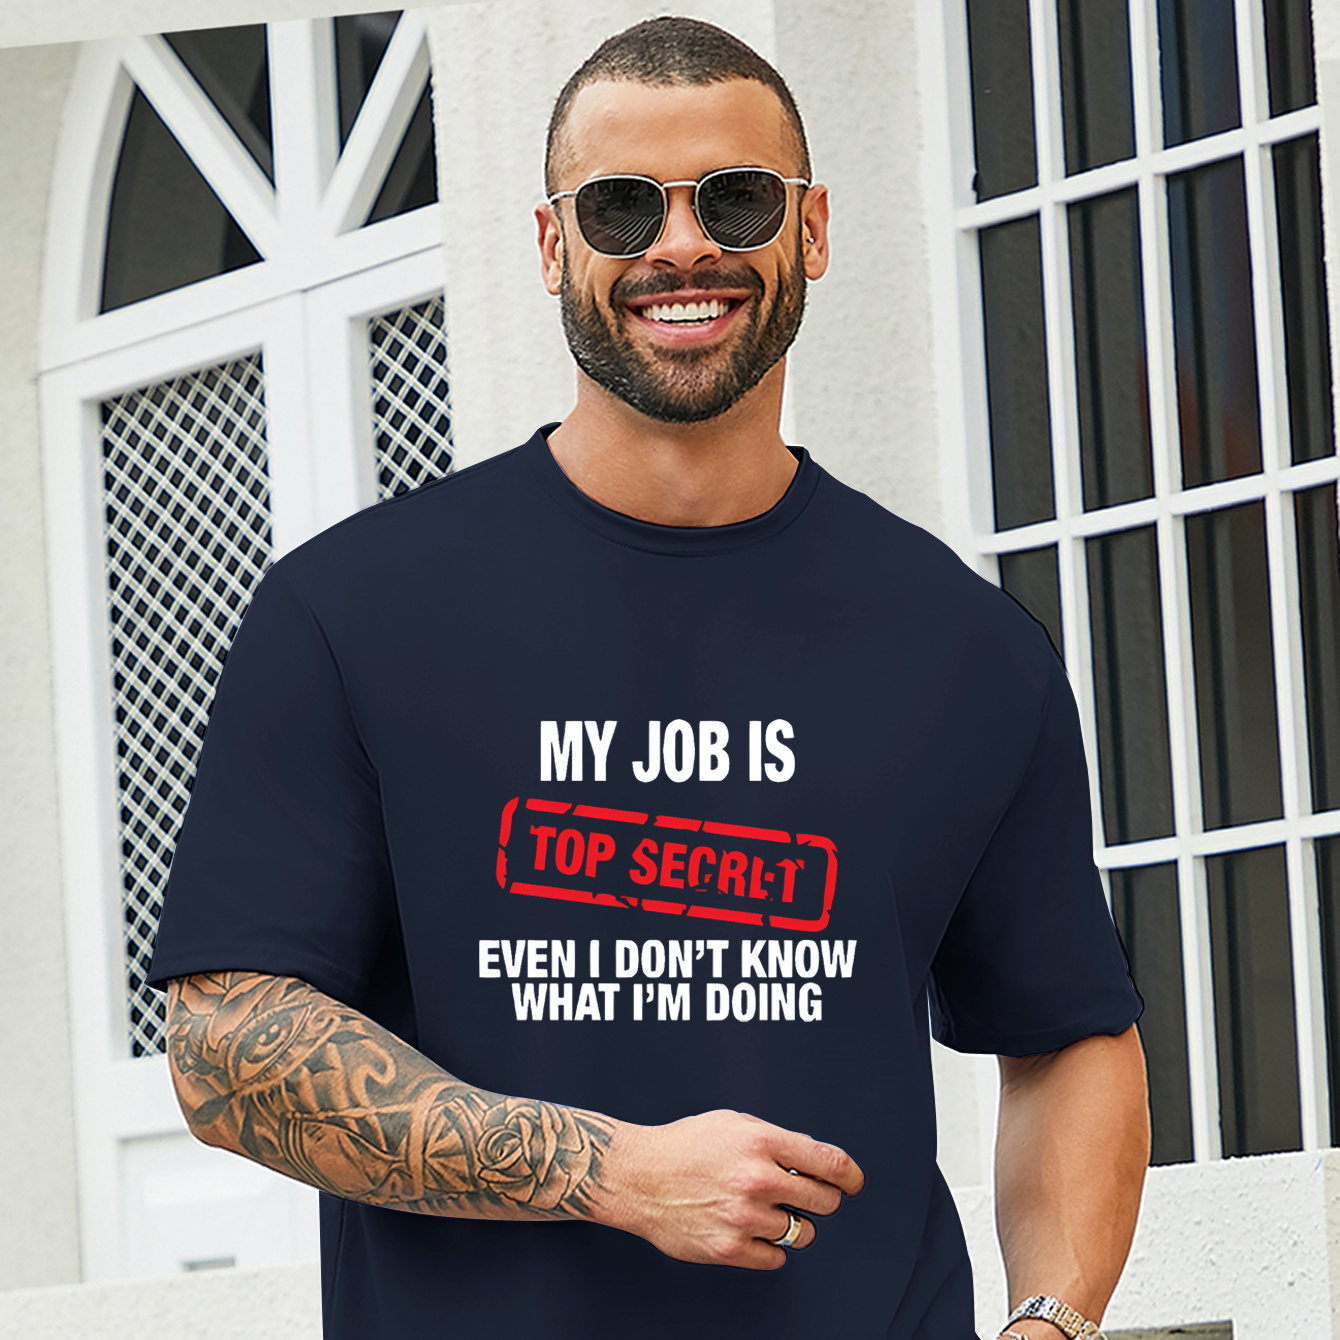 

My Job Is Top Secret Print Men's Round Neck Short Sleeve Tee Fashion Regular Fit T-shirt Top For Spring Summer Holiday Leisure Vacation